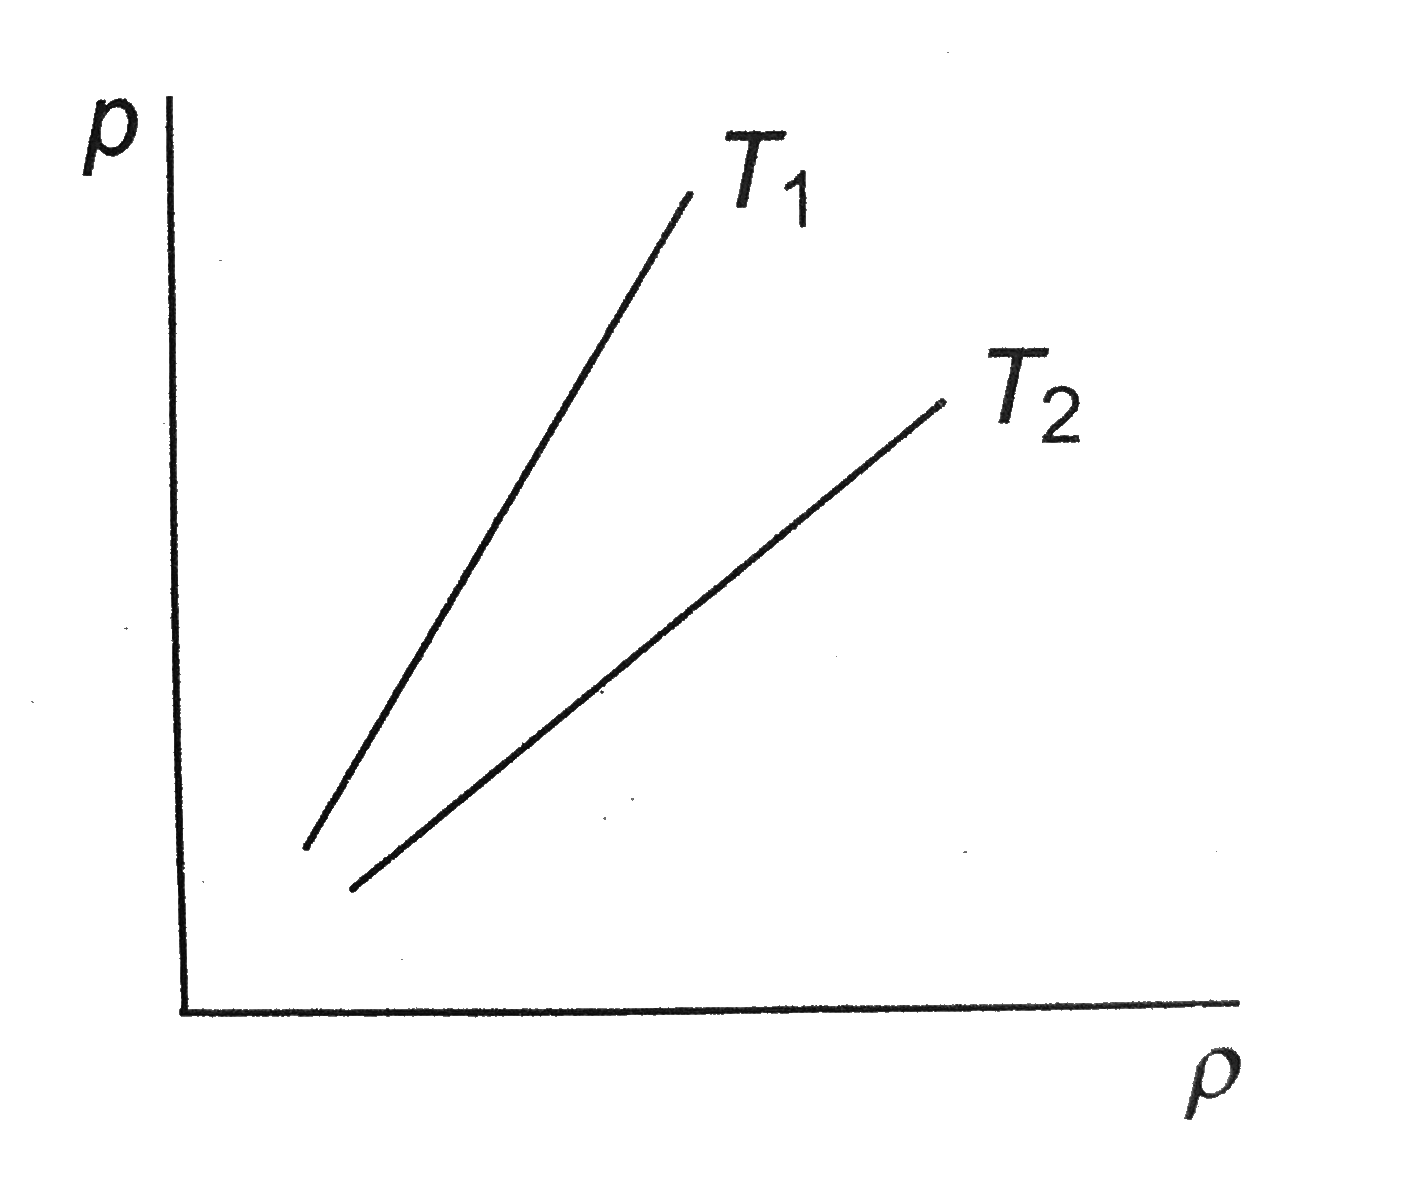 Figure shows graphs of pressure vs density for an ideal gas at two temperature T(1) and T(2). Which of the following is correct?